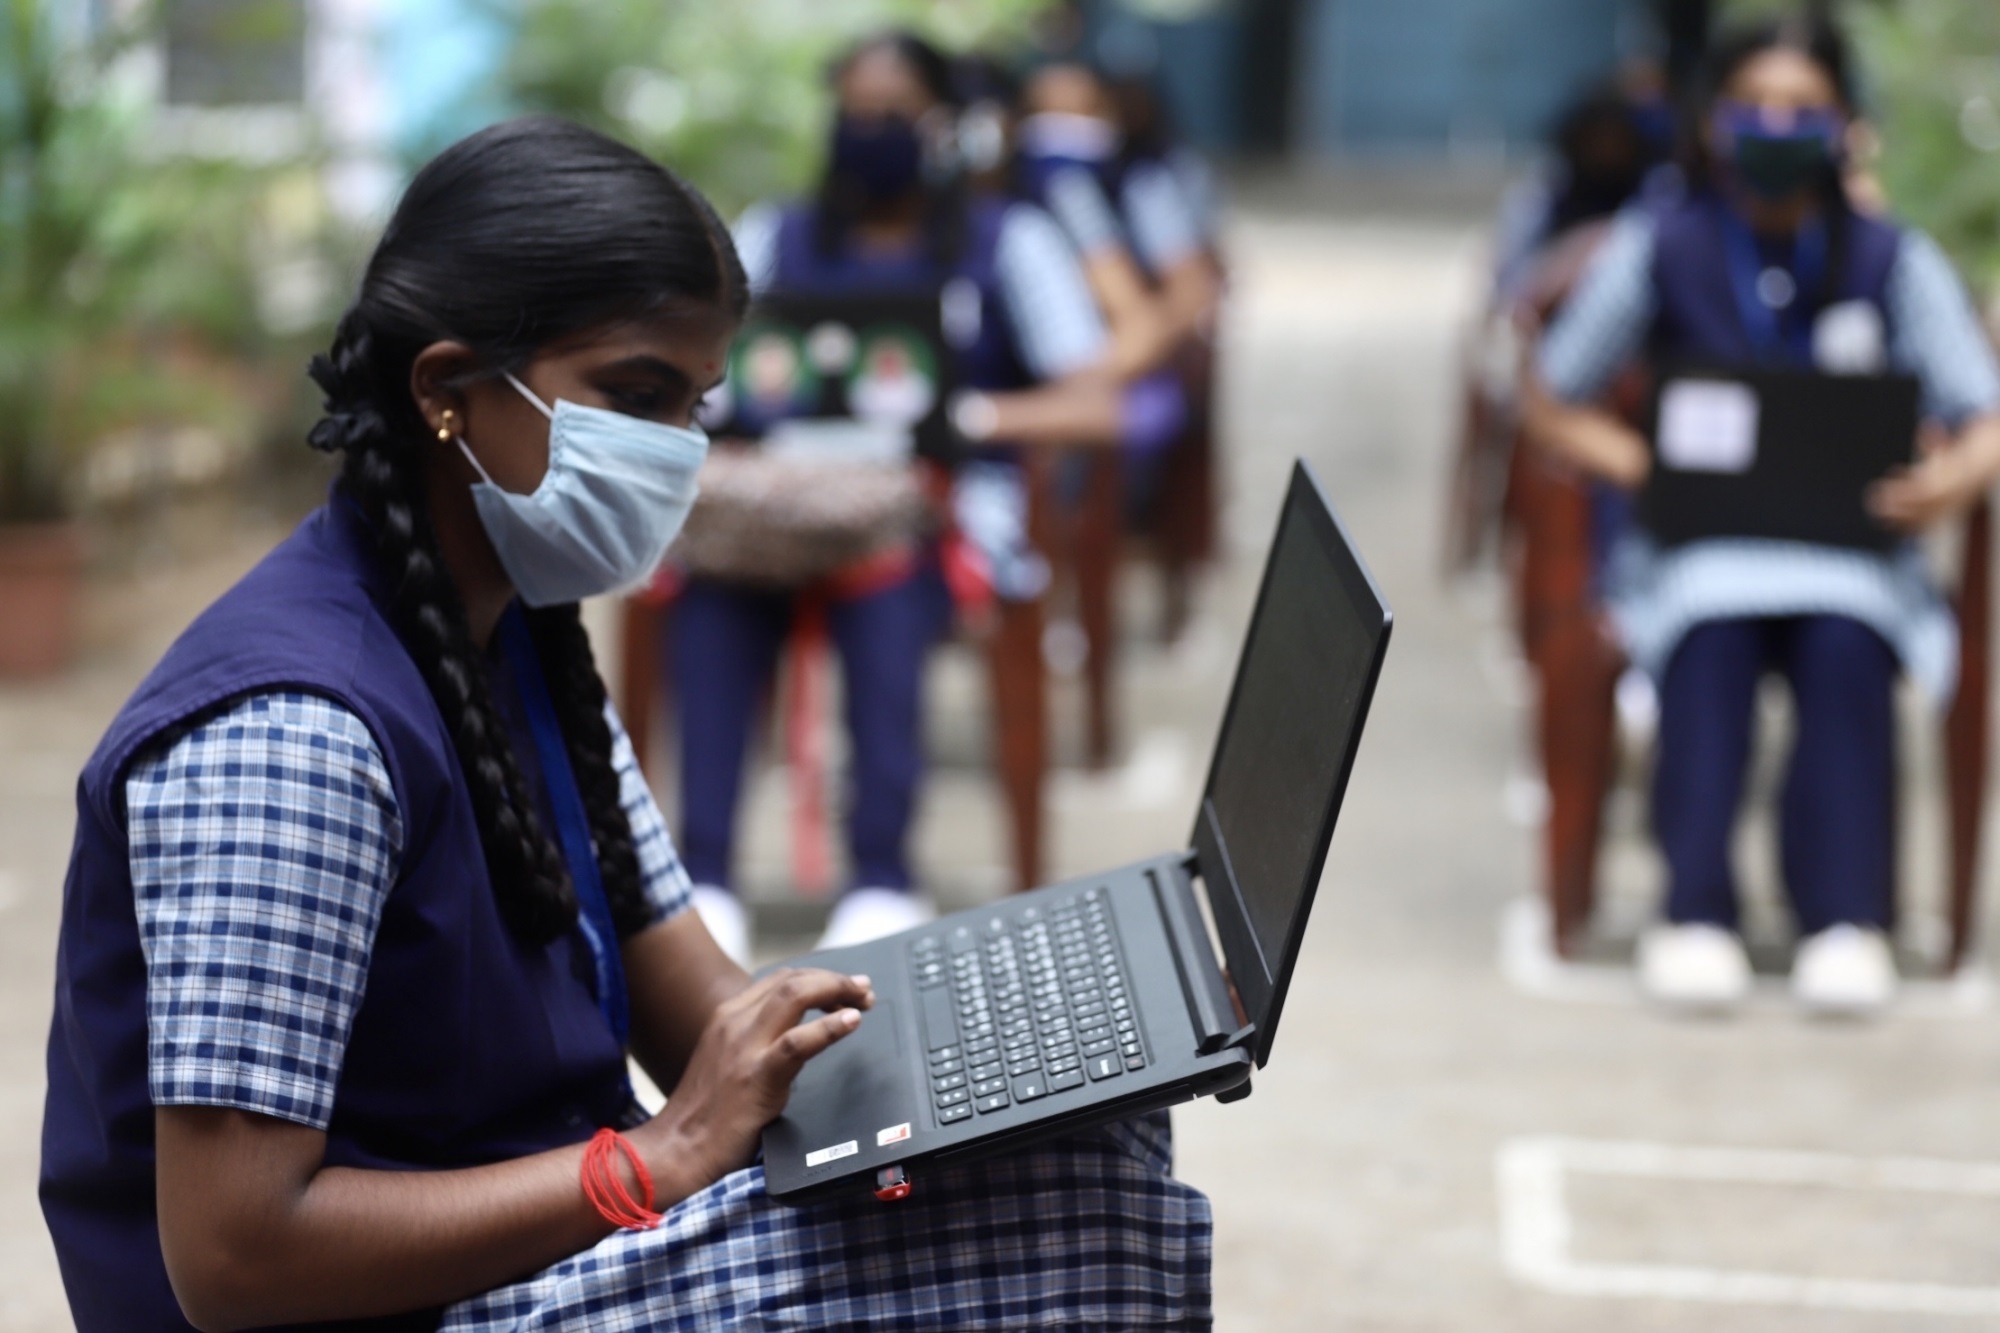 Kerala becomes first state to go digital in public education